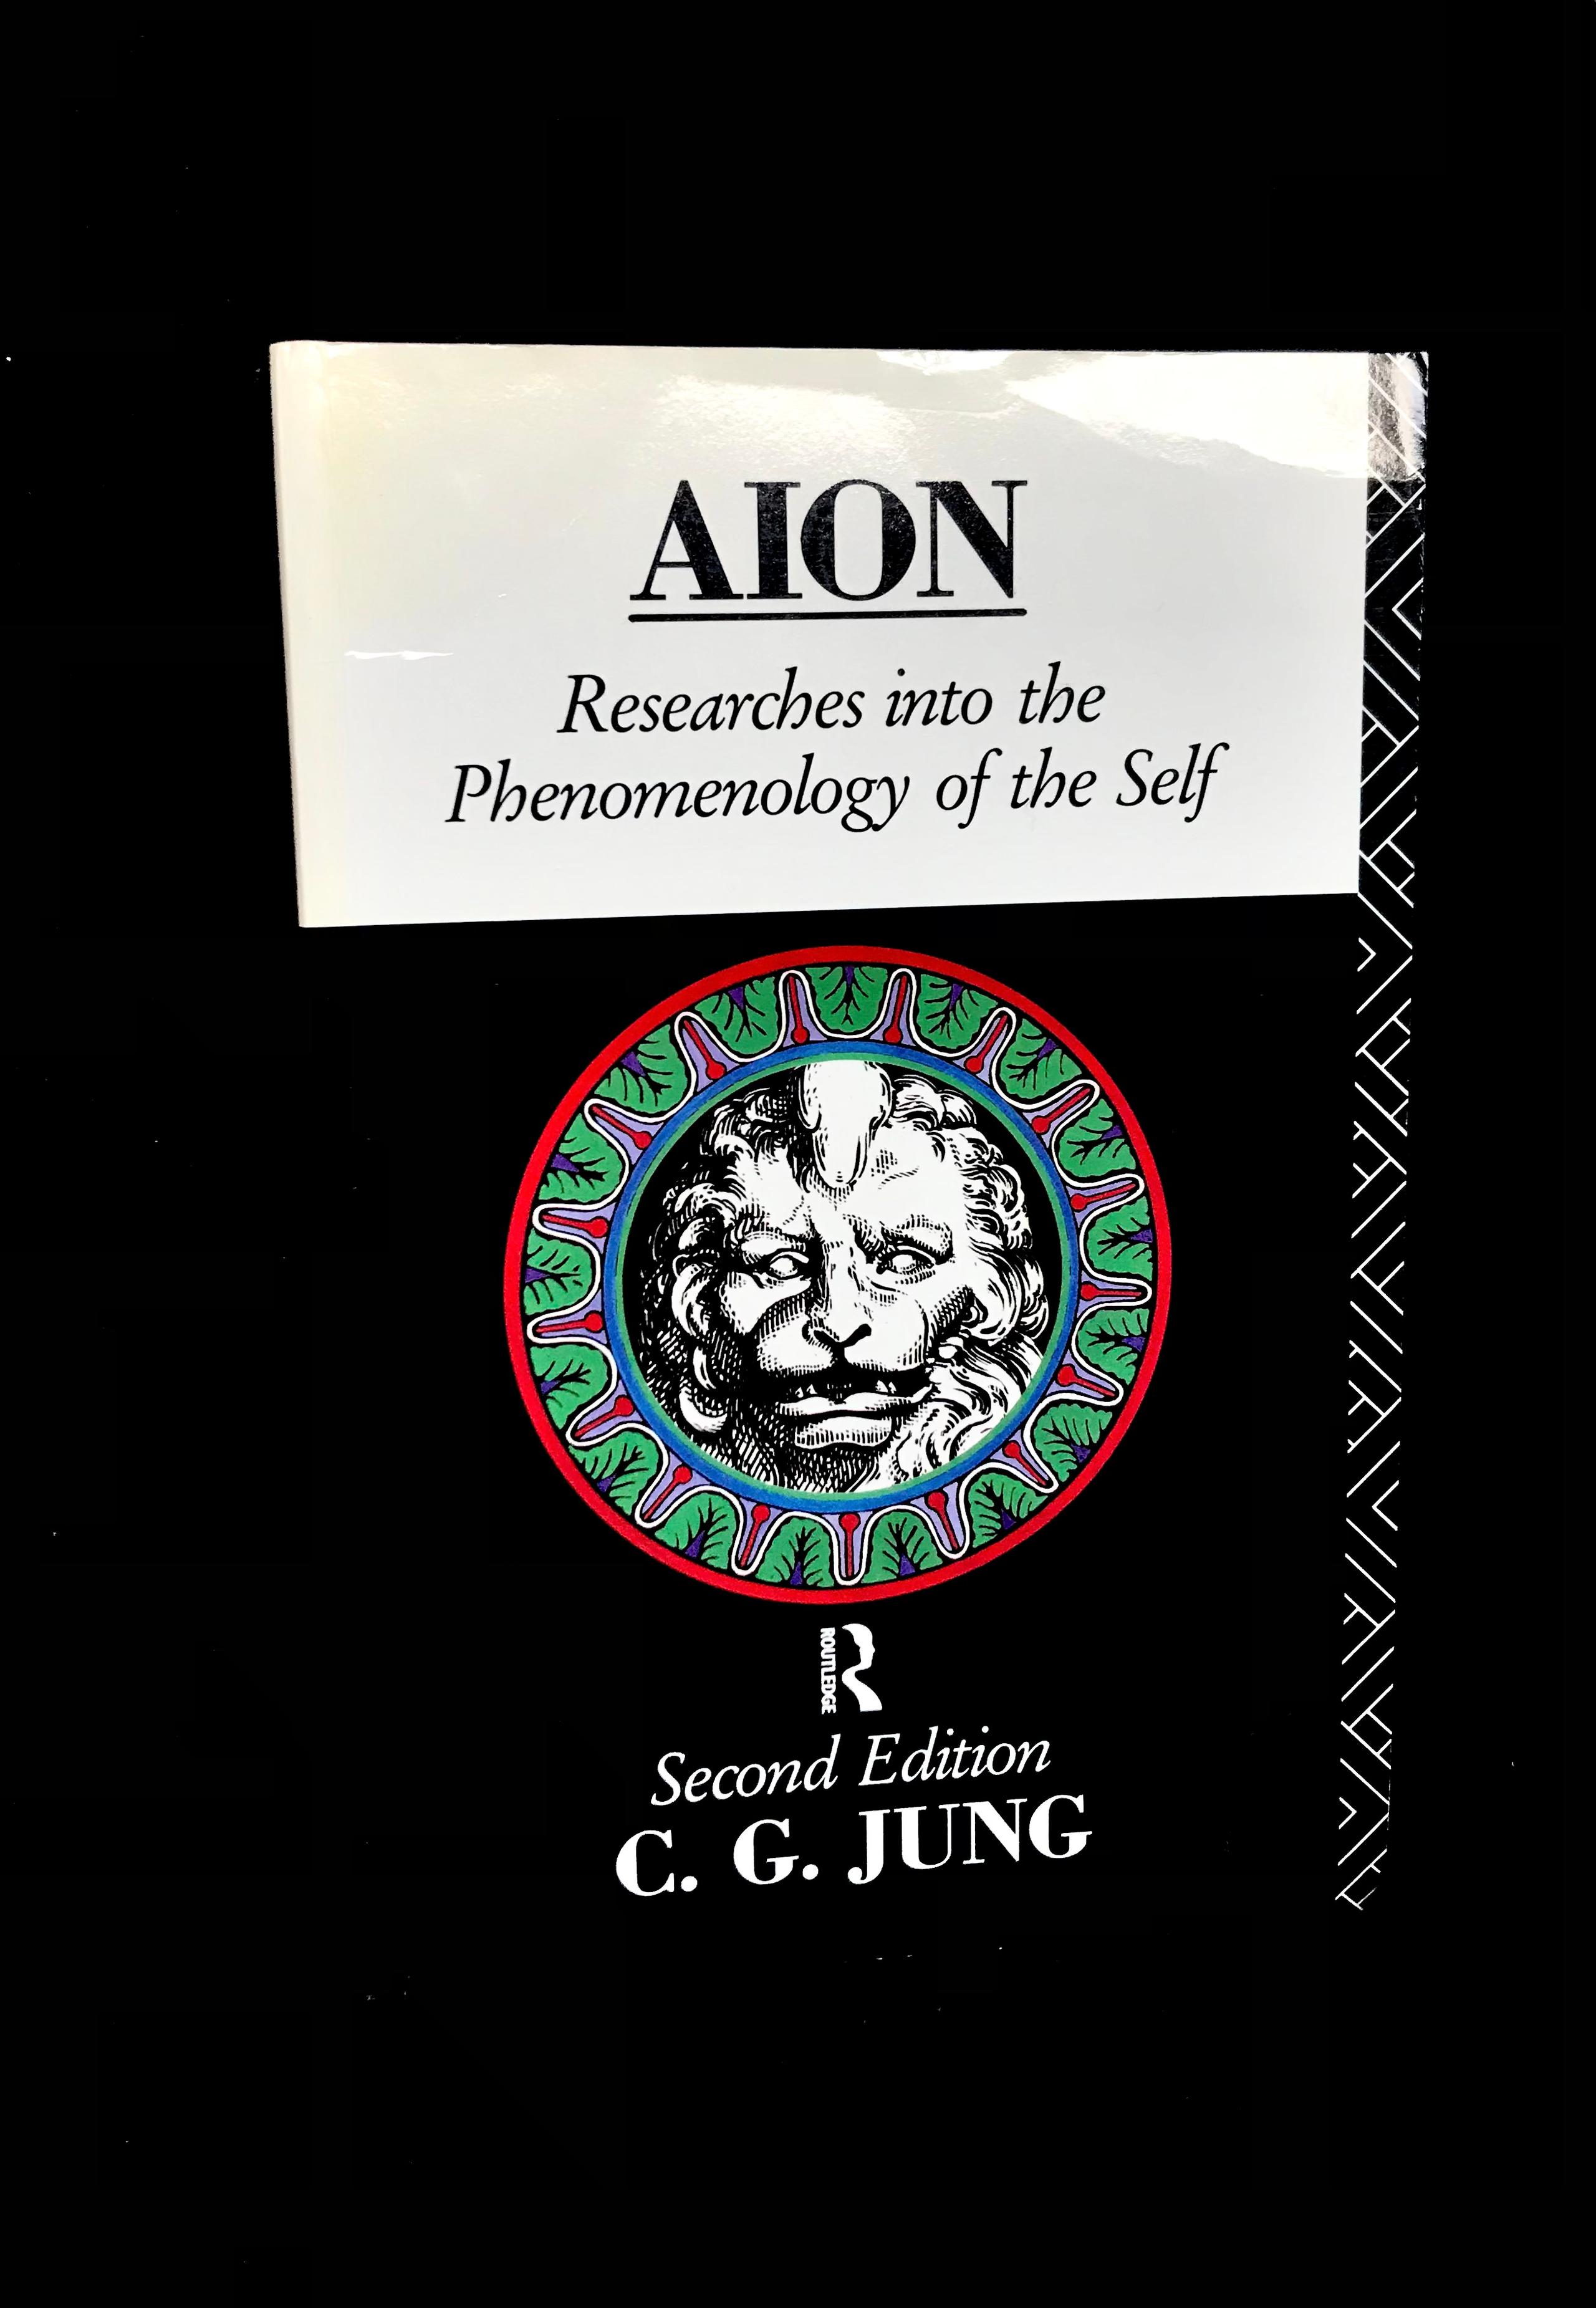 AION: Researches Into the Phenomenology of the Self by C. G. Jung